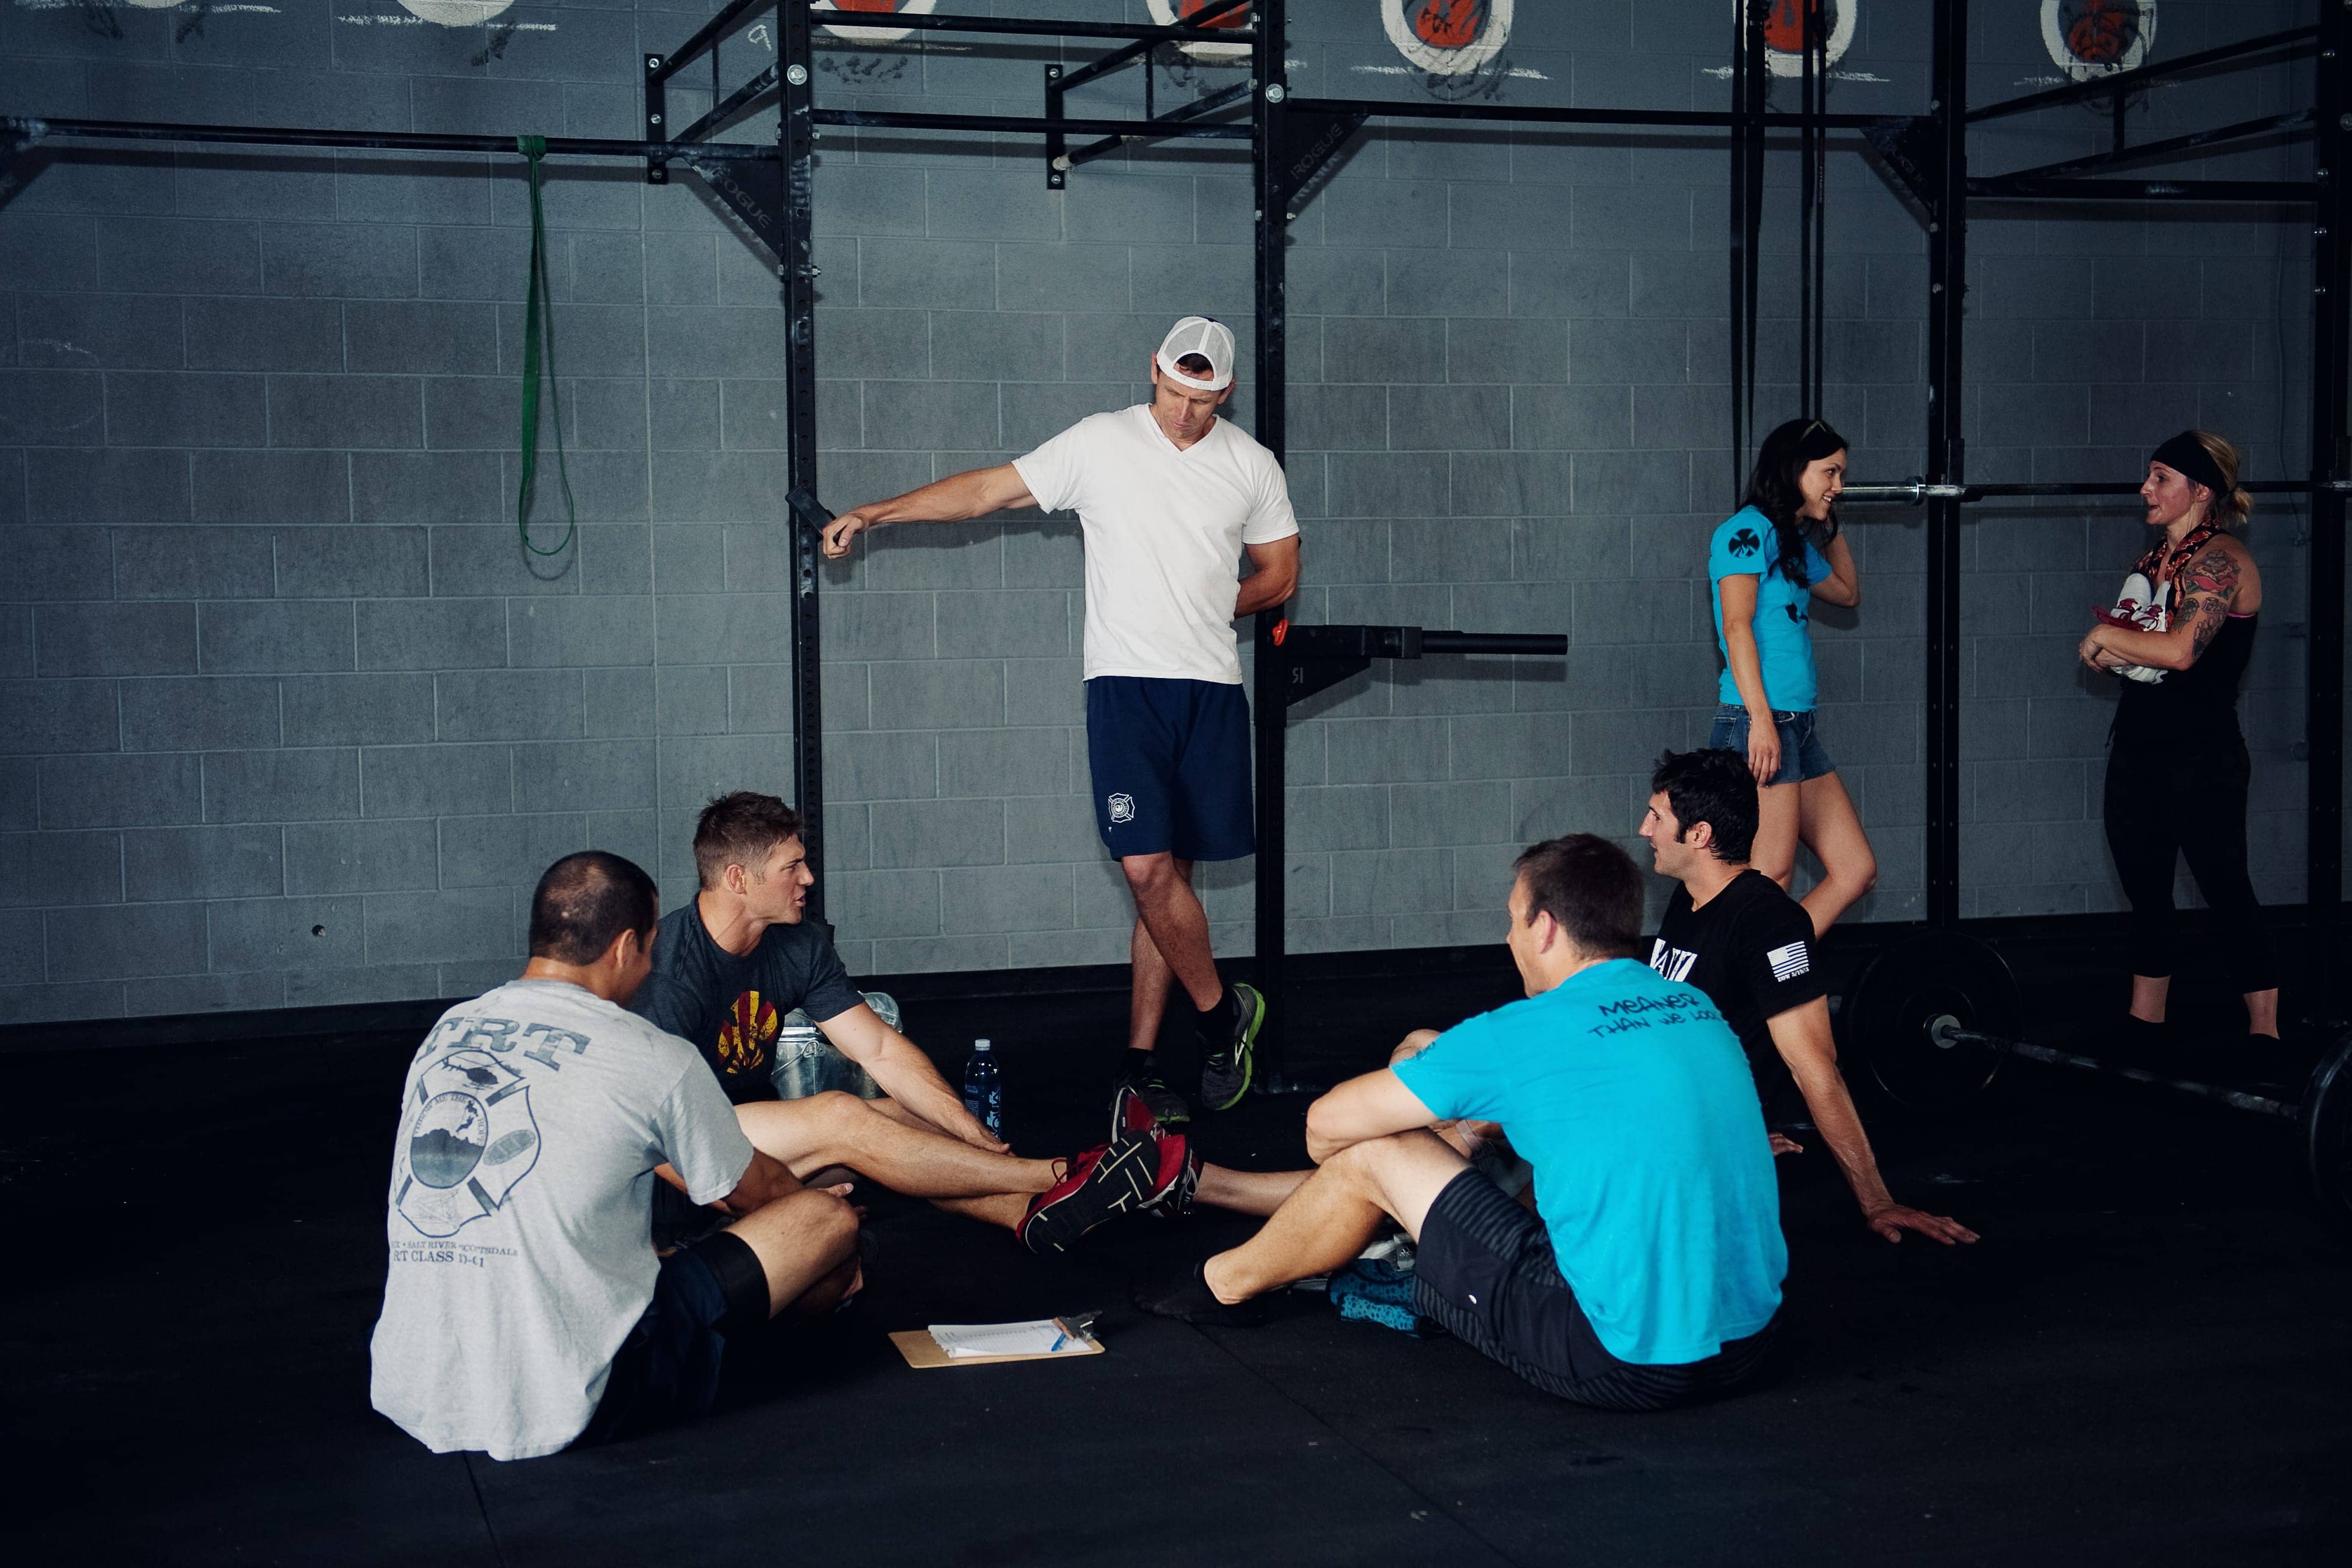 JULY REFERRALS! WHO'S WODding FOR FREE THIS MONTH? - CrossFit Incendia